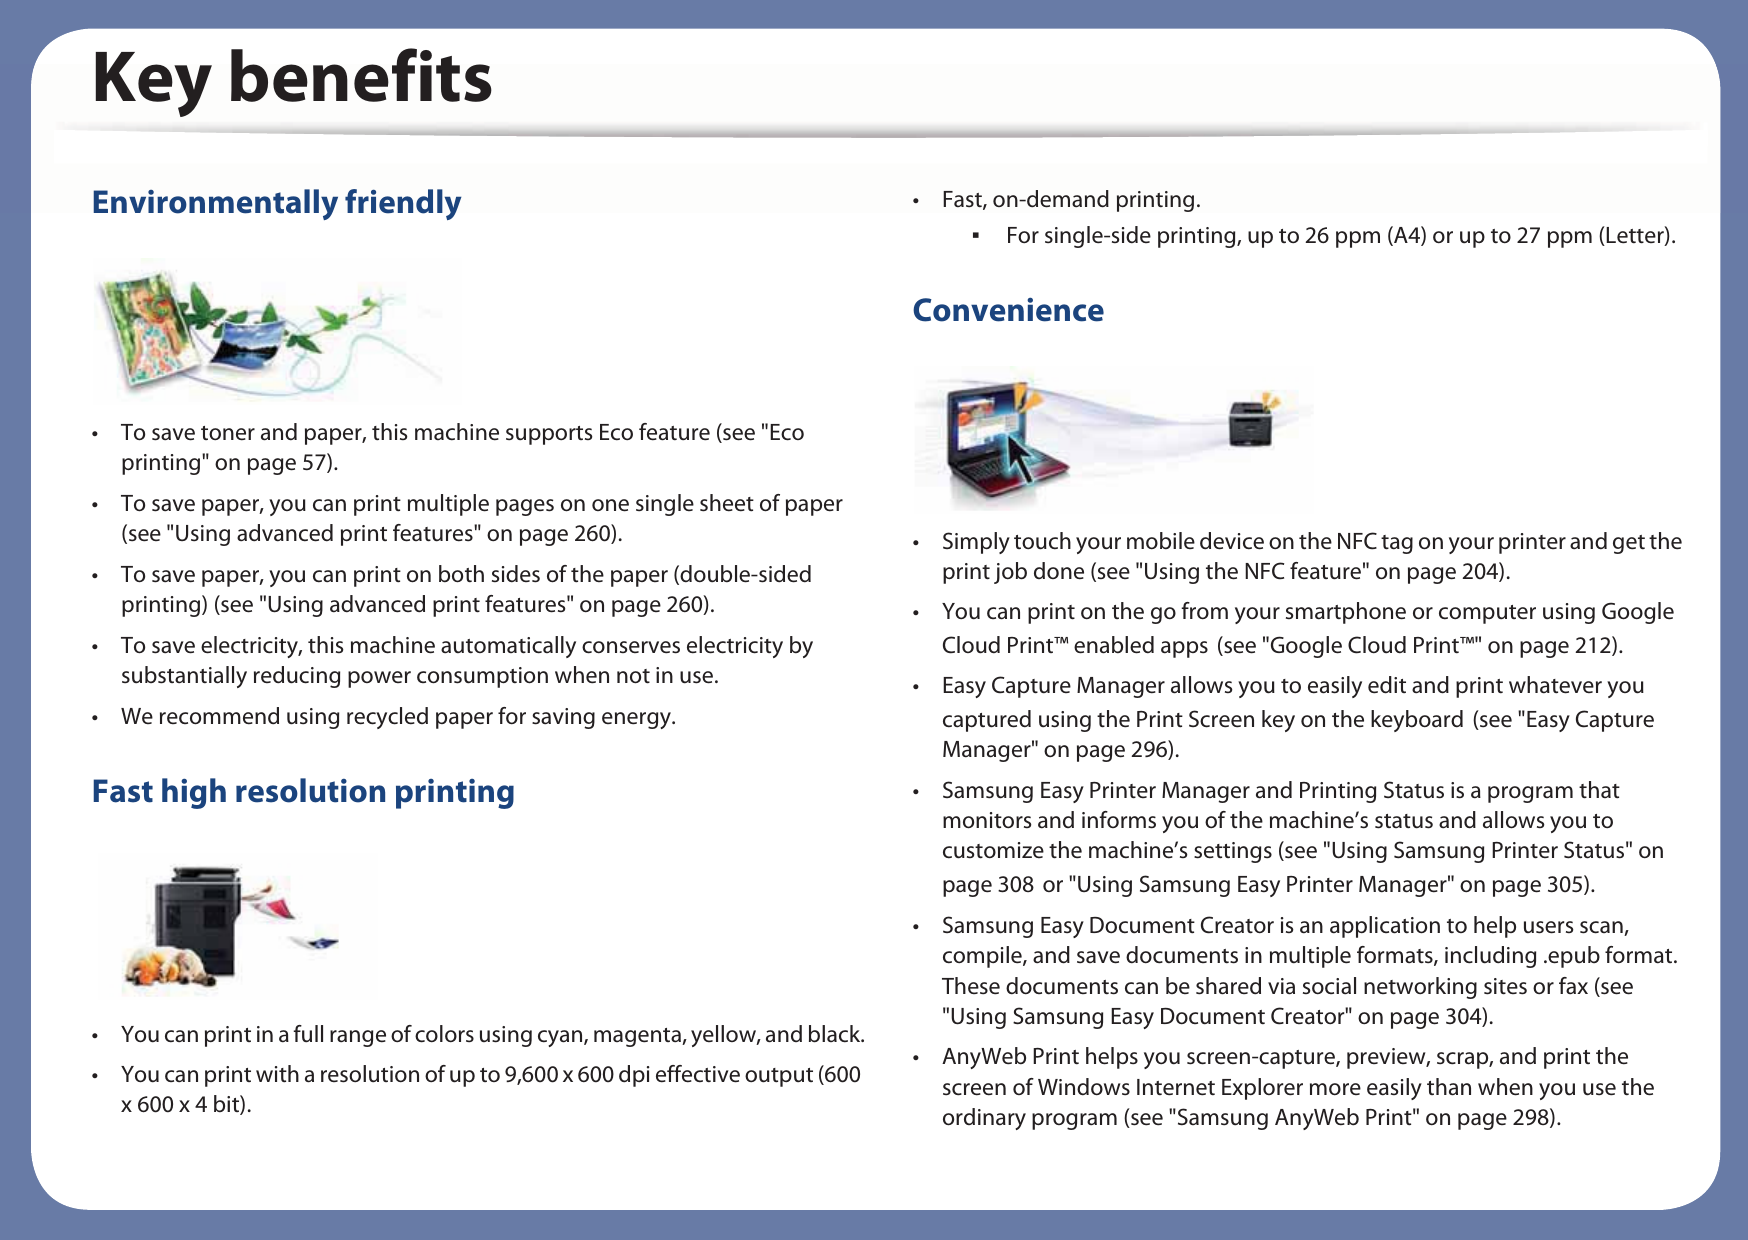 Key benefitsEnvironmentally friendly• To save toner and paper, this machine supports Eco feature (see &quot;Eco printing&quot; on page 57).• To save paper, you can print multiple pages on one single sheet of paper (see &quot;Using advanced print features&quot; on page 260).• To save paper, you can print on both sides of the paper (double-sided printing) (see &quot;Using advanced print features&quot; on page 260).• To save electricity, this machine automatically conserves electricity by substantially reducing power consumption when not in use.• We recommend using recycled paper for saving energy.Fast high resolution printing• You can print in a full range of colors using cyan, magenta, yellow, and black.• You can print with a resolution of up to 9,600 x 600 dpi effective output (600 x 600 x 4 bit).• Fast, on-demand printing. For single-side printing, up to 26 ppm (A4) or up to 27 ppm (Letter).Convenience• Simply touch your mobile device on the NFC tag on your printer and get the print job done (see &quot;Using the NFC feature&quot; on page 204).• You can print on the go from your smartphone or computer using Google Cloud Print™ enabled appsG(see &quot;Google Cloud Print™&quot; on page 212).• Easy Capture Manager allows you to easily edit and print whatever you captured using the Print Screen key on the keyboardG(see &quot;Easy Capture Manager&quot; on page 296).• Samsung Easy Printer Manager and Printing Status is a program that monitors and informs you of the machine’s status and allows you to customize the machine’s settings (see &quot;Using Samsung Printer Status&quot; on page 308Gor &quot;Using Samsung Easy Printer Manager&quot; on page 305).• Samsung Easy Document Creator is an application to help users scan, compile, and save documents in multiple formats, including .epub format. These documents can be shared via social networking sites or fax (see &quot;Using Samsung Easy Document Creator&quot; on page 304).• AnyWeb Print helps you screen-capture, preview, scrap, and print the screen of Windows Internet Explorer more easily than when you use the ordinary program (see &quot;Samsung AnyWeb Print&quot; on page 298).